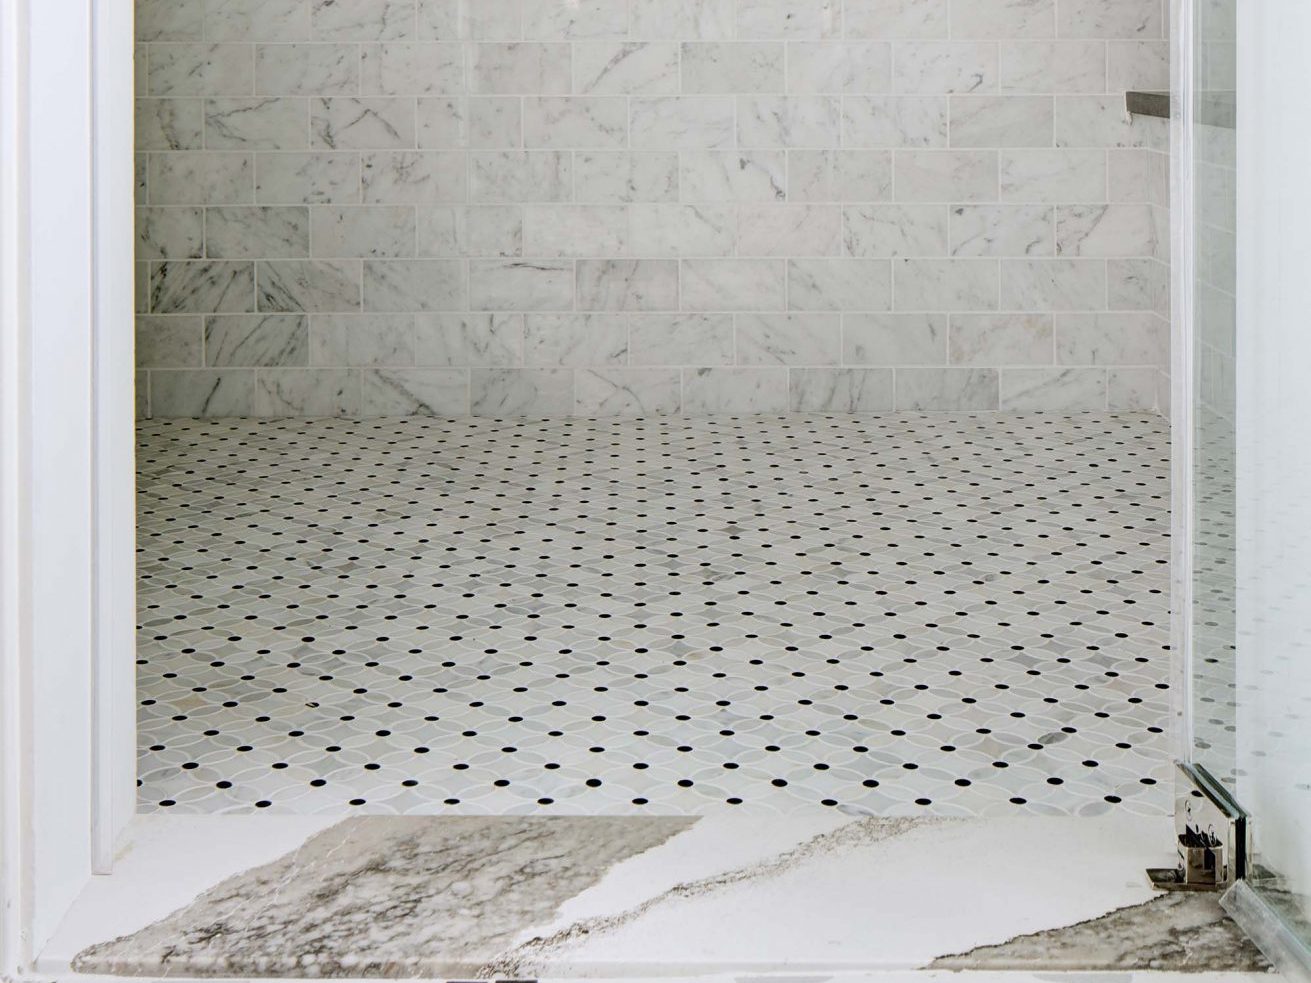 New shower with tile pattern